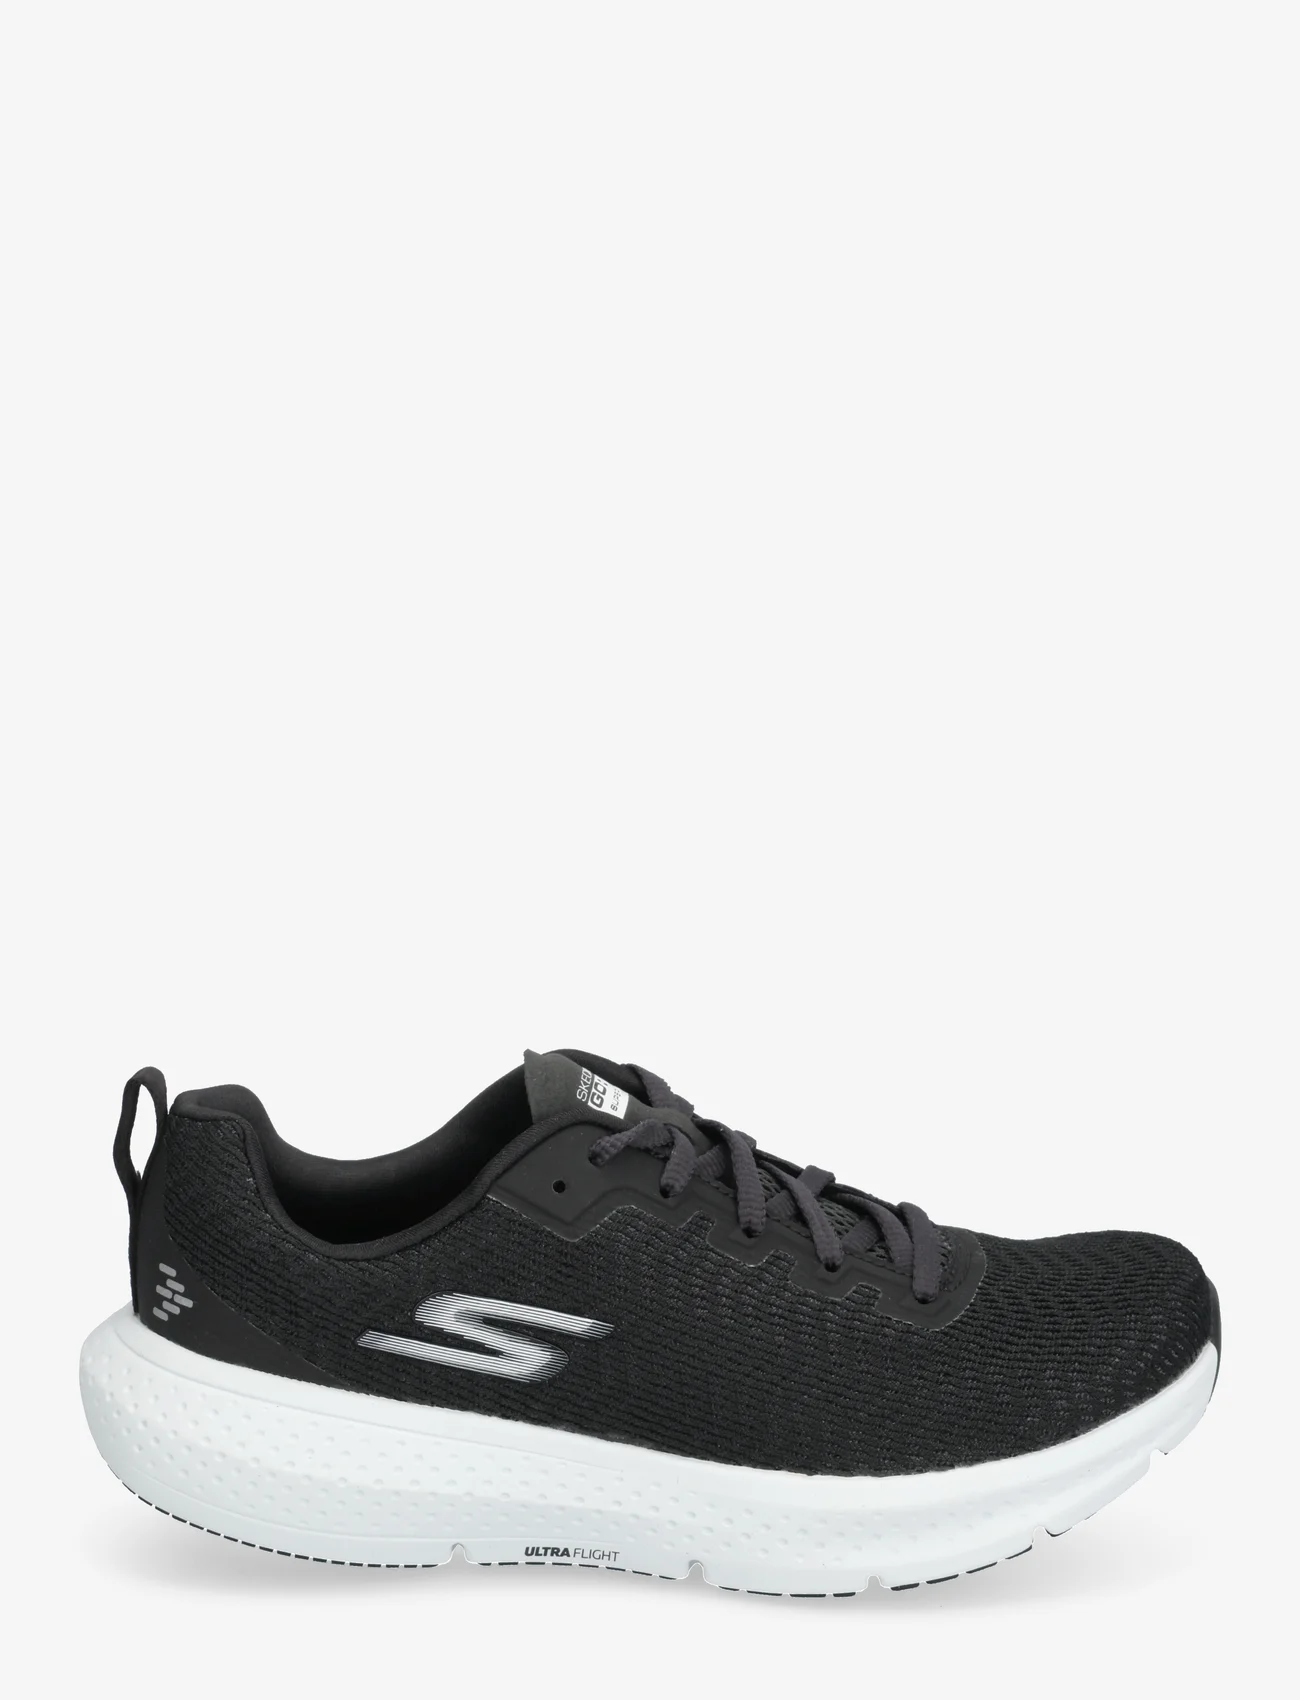 Skechers - Womens Go Run Supersonic - Relaxed Fit - bėgimo bateliai - bkw black white - 1